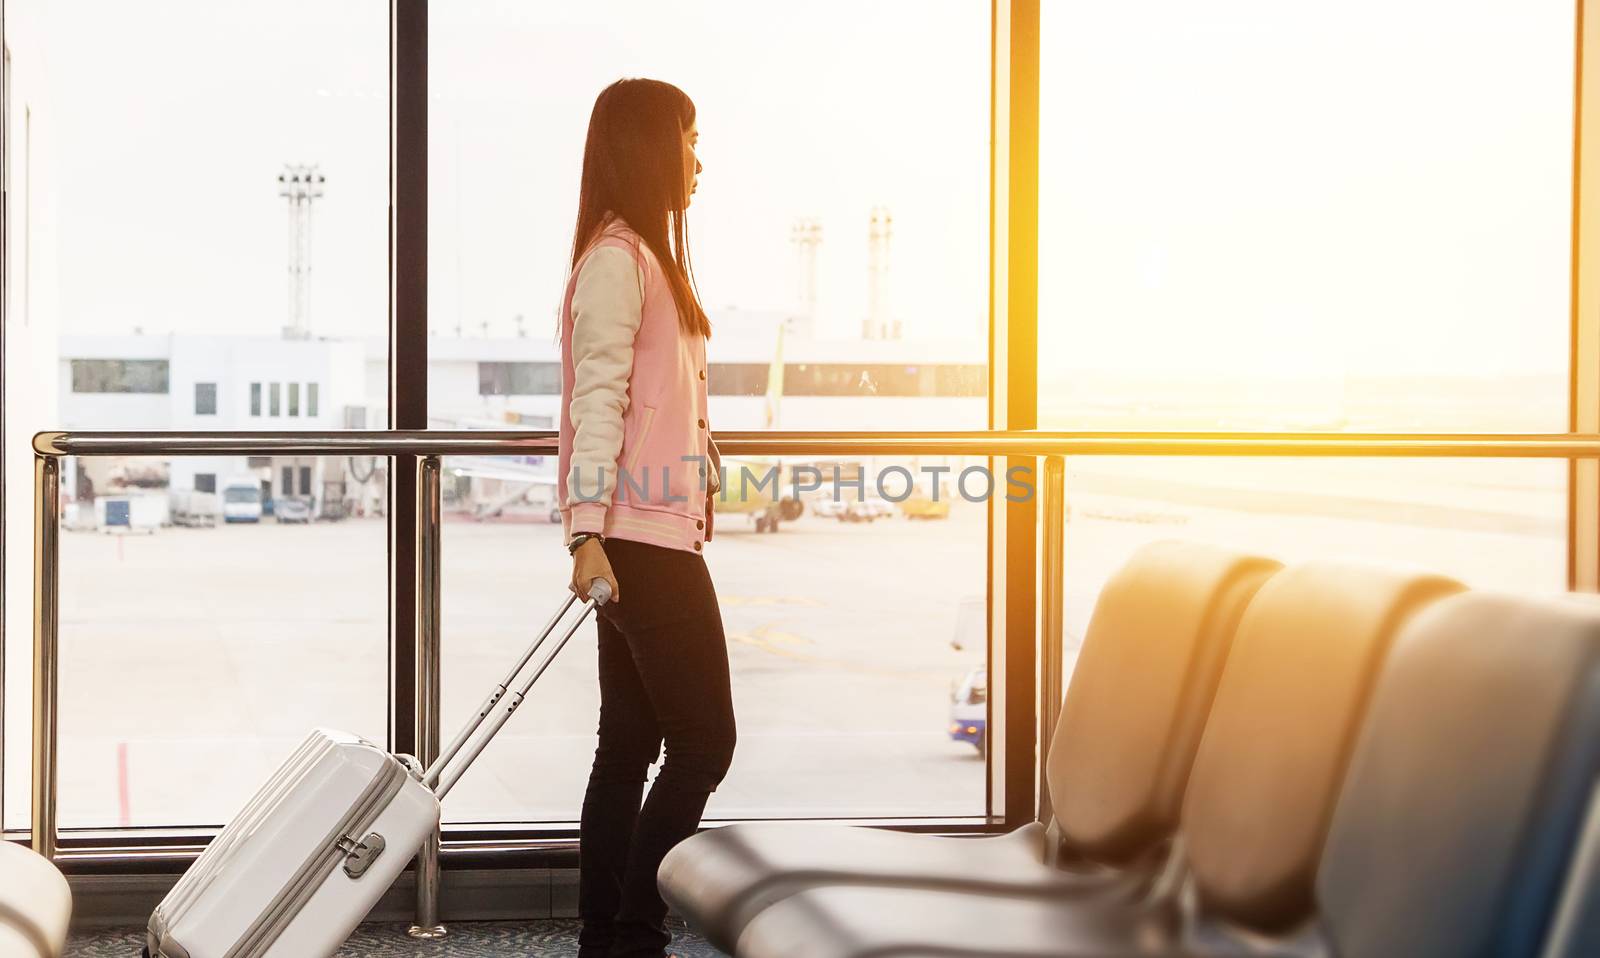 Travel lifestyle concept. Travel tourist woman waiting at boarding gate terminal before departure with luggage looking at airplanes with sunrise view at airport window for morning flight.